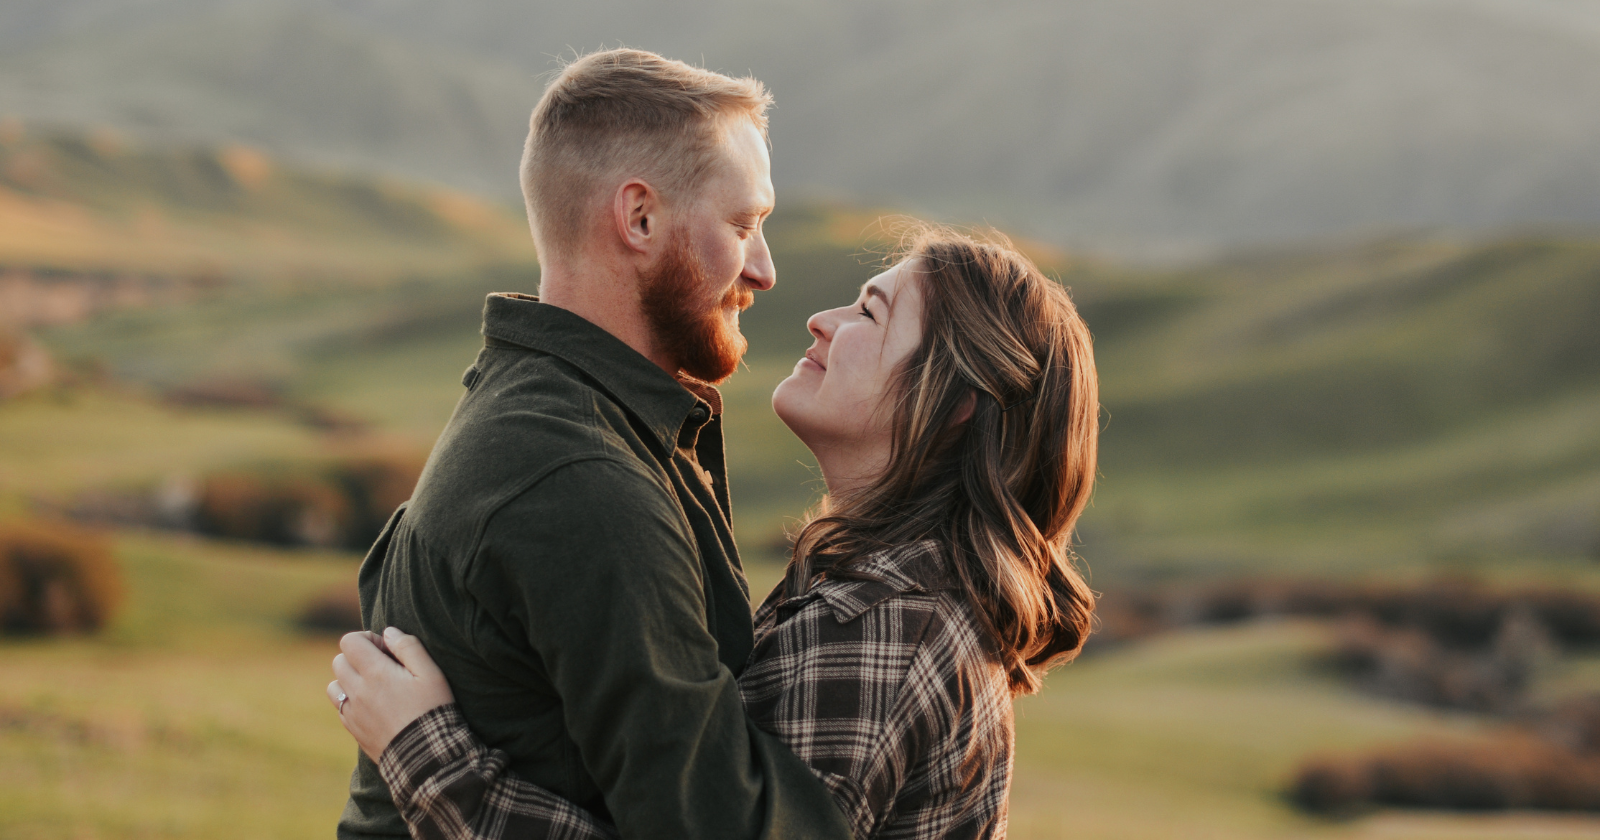 8 signs you've found your life partner, according to psychology